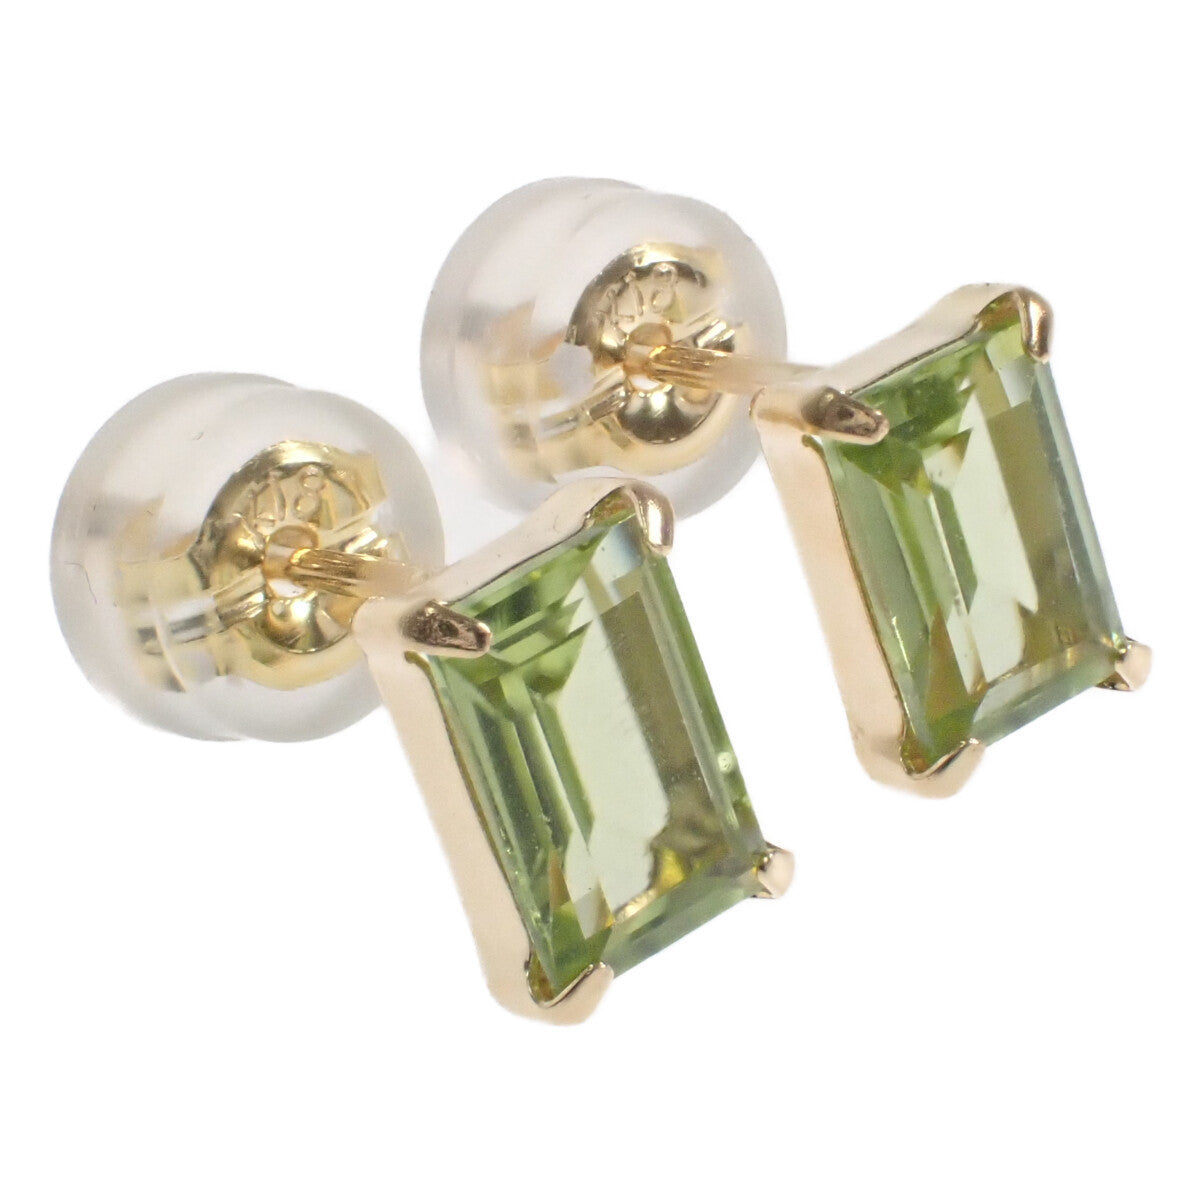 [LuxUness]  K18 Yellow Gold & Peridot Square Design Earrings, Green for Women - New & Unused in Brand new